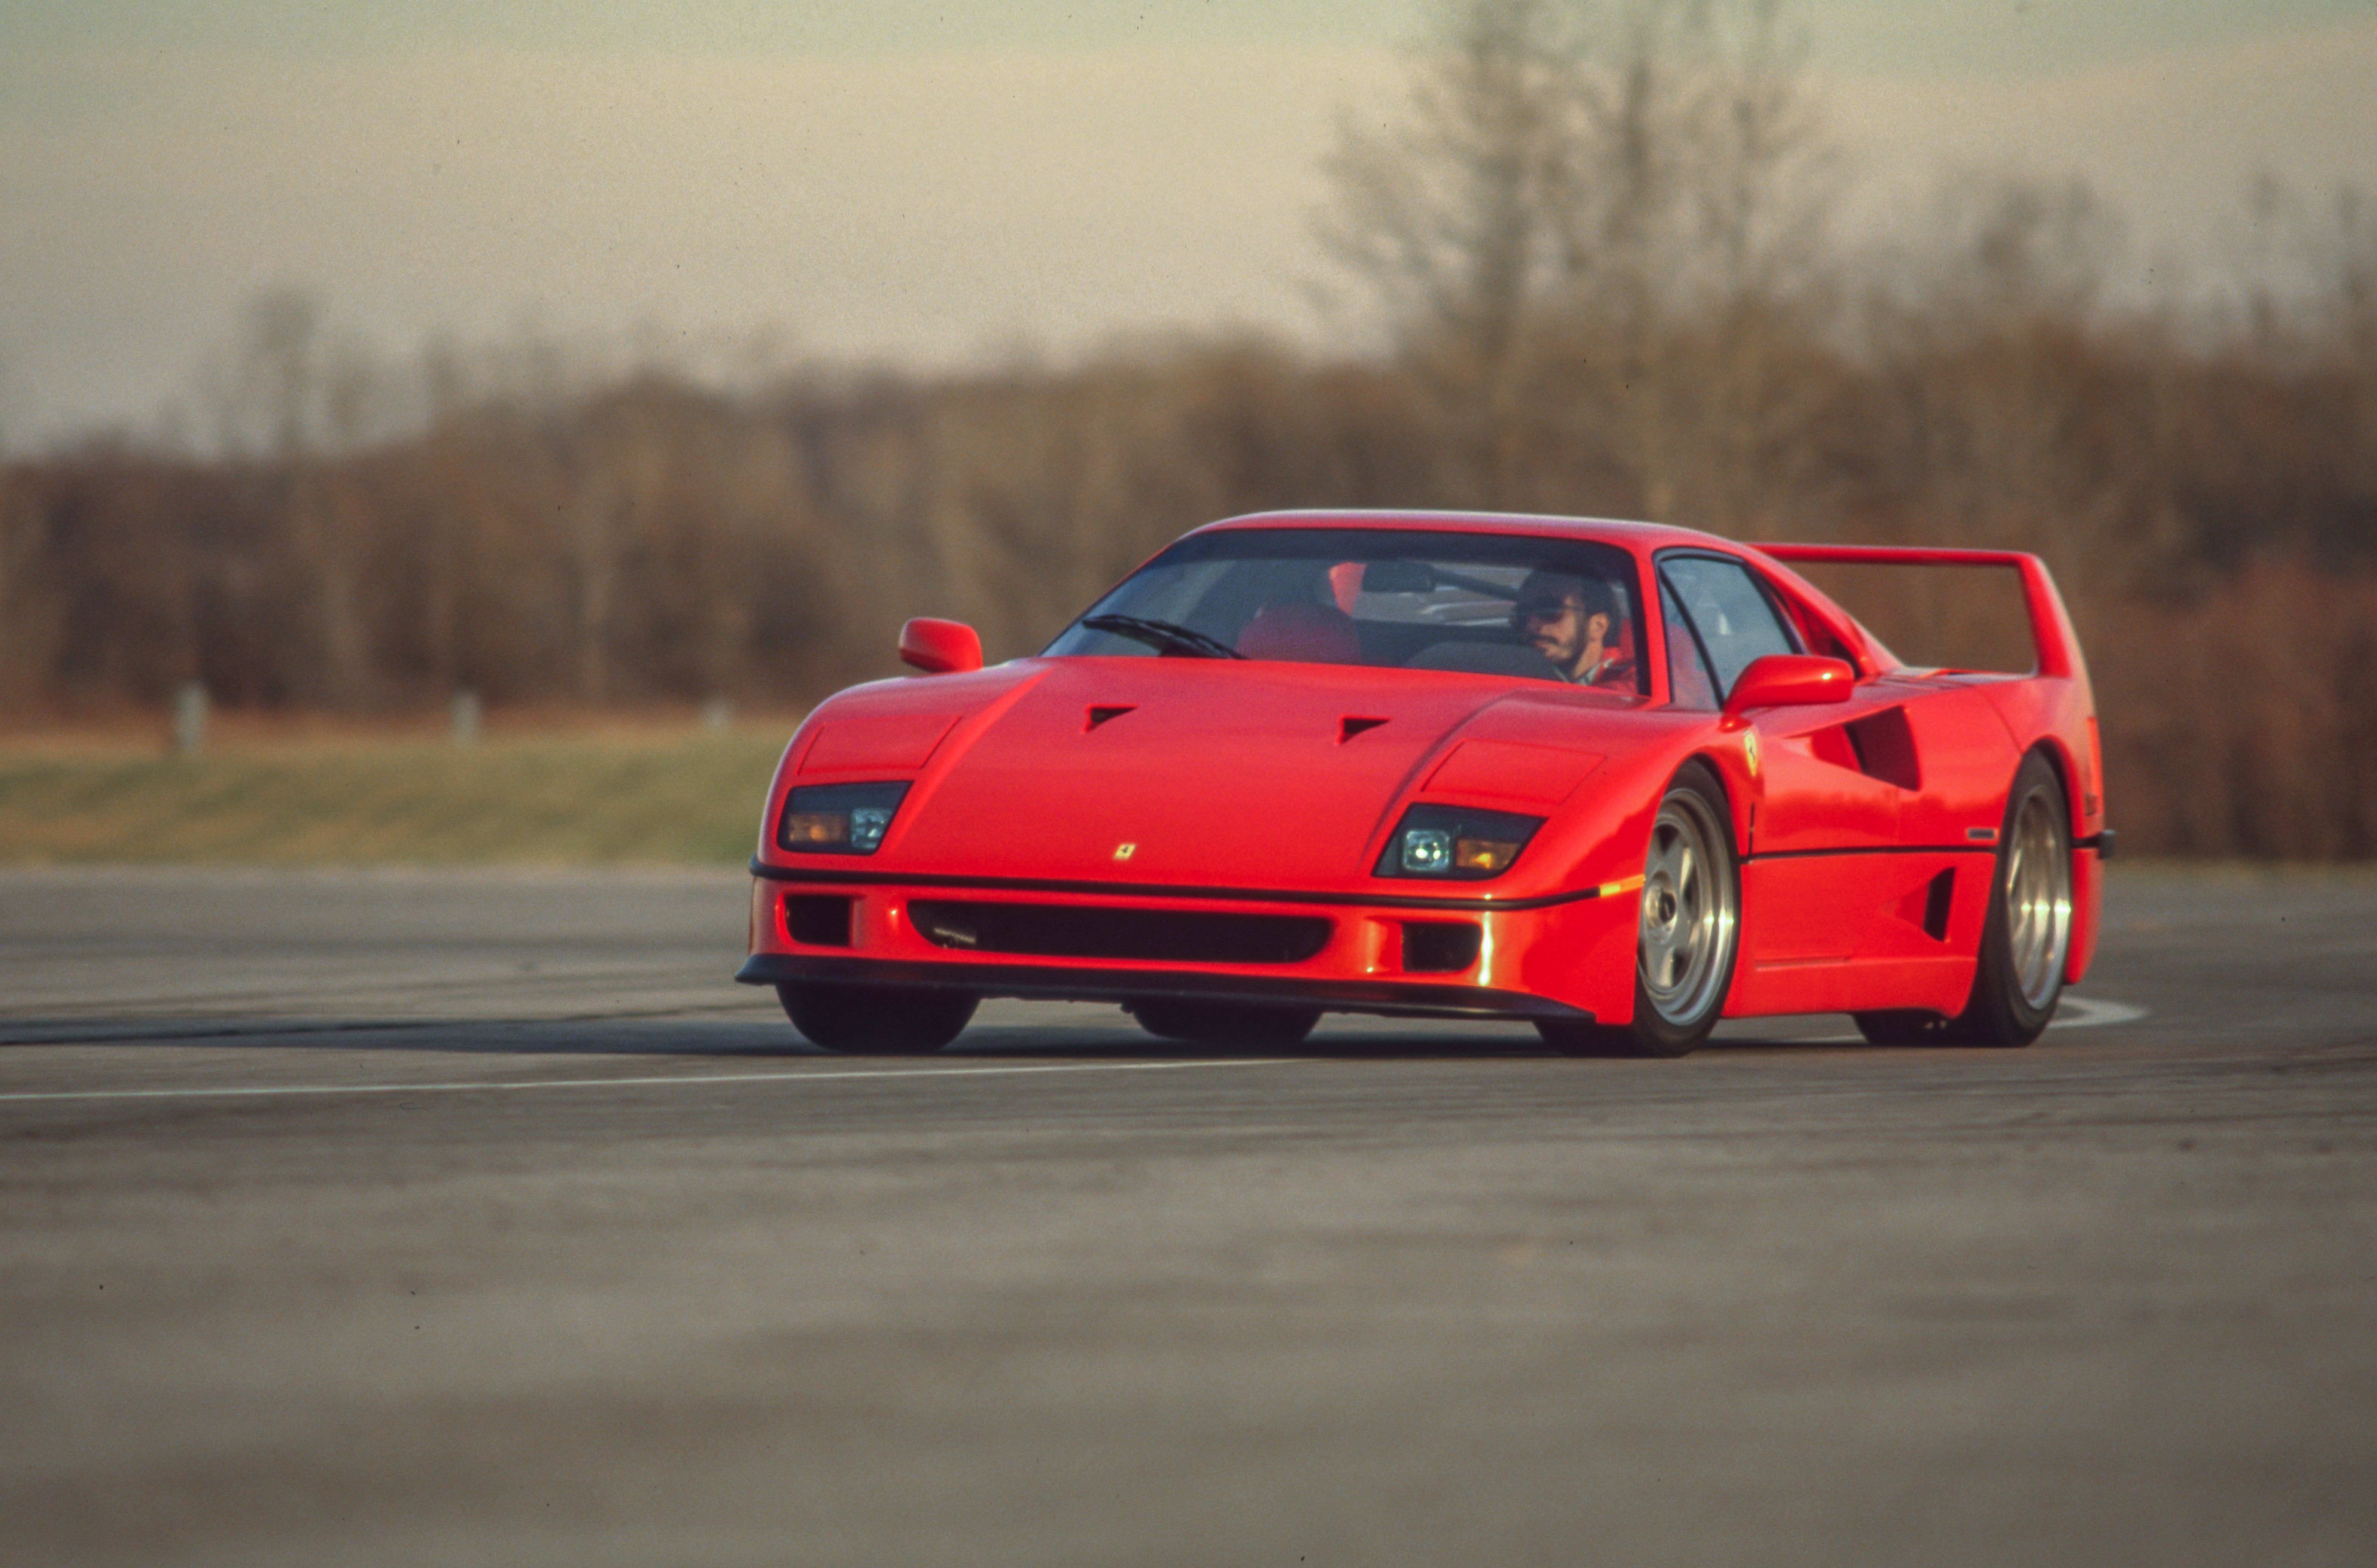 The F40 1 Series. A car that a lot of BMW fans don't like, but I